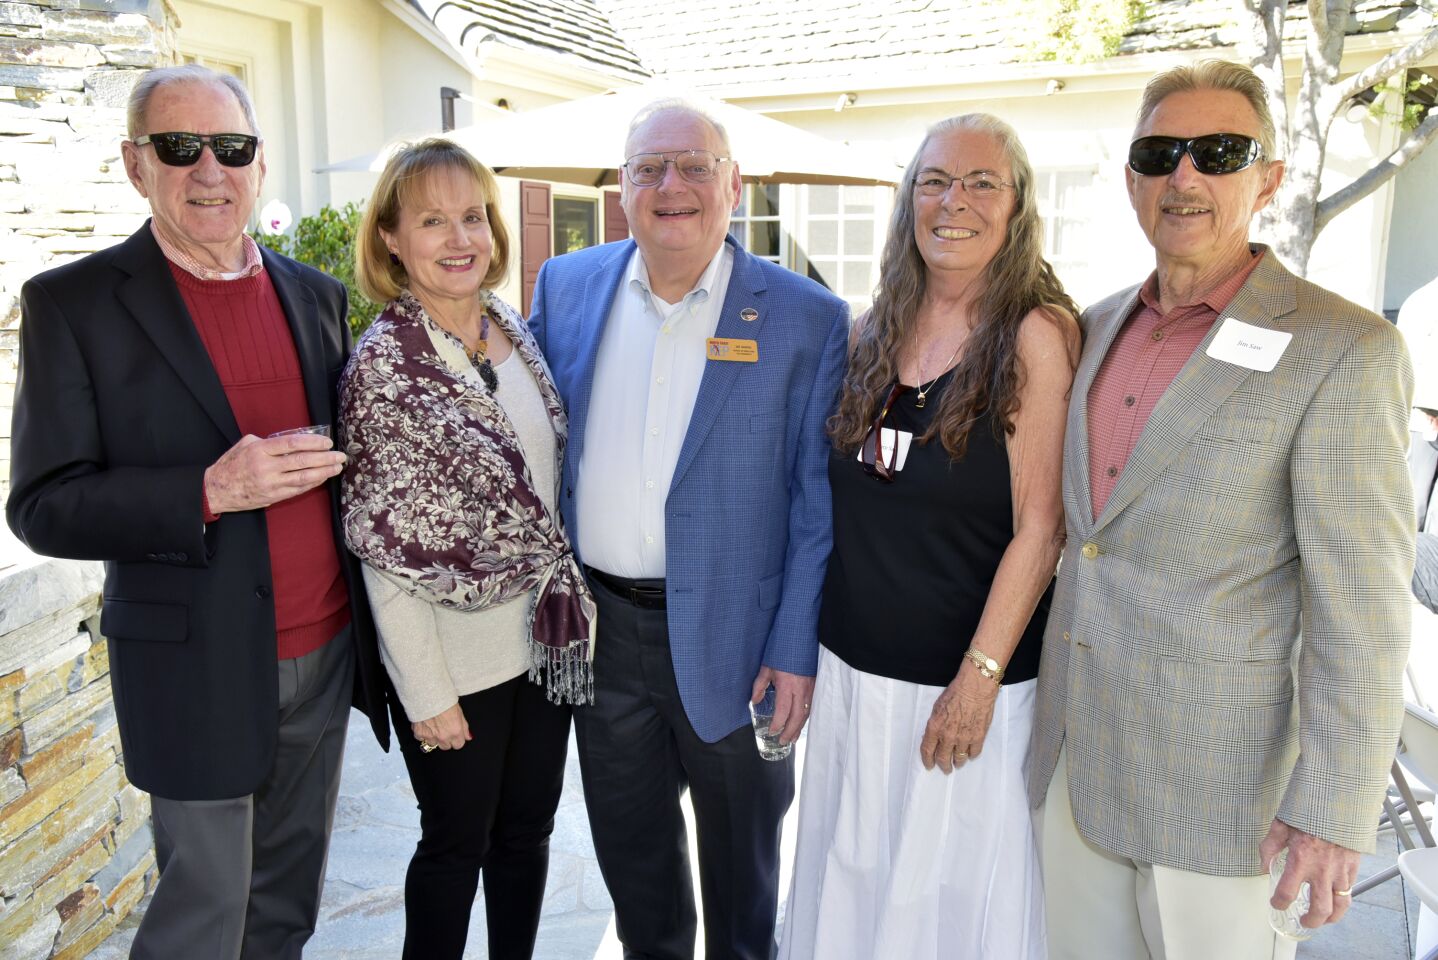 Dave Laing, San Diego's 2020 Champion for the Arts Awardees Julie and Jay Sarno (he's also a North Coast Repertory Theatre board member), Jim and Nancy Saw